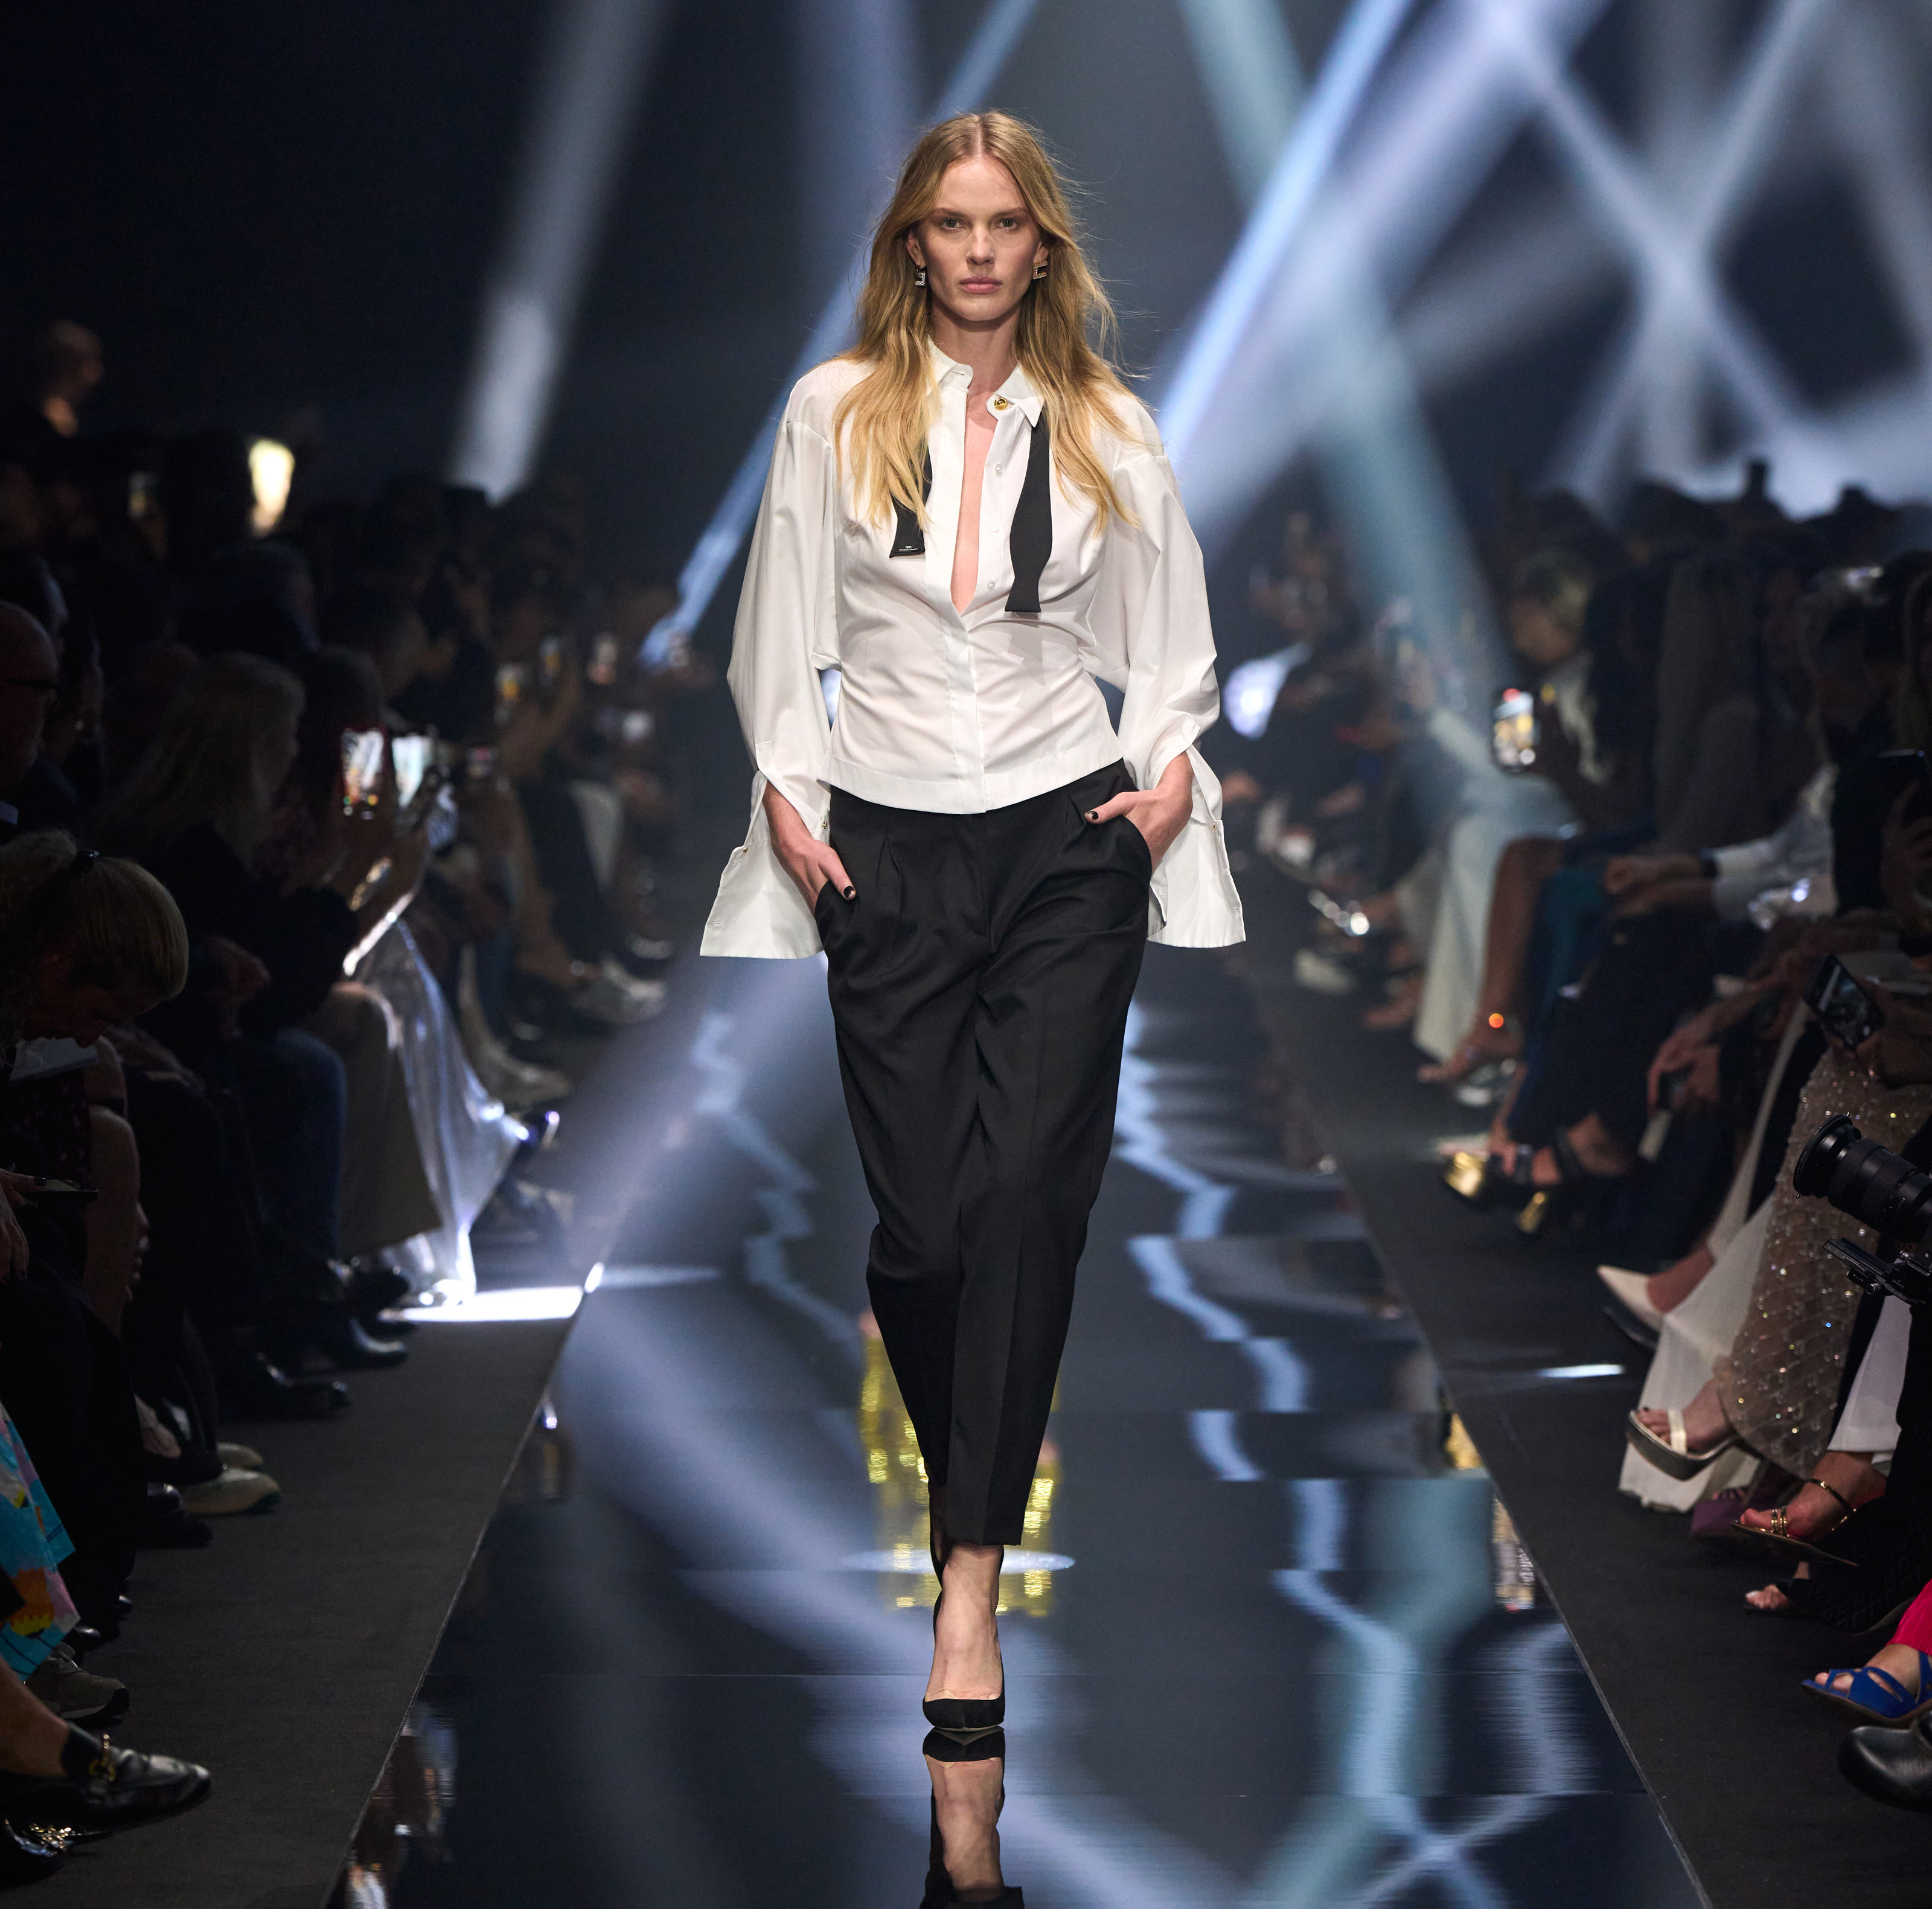 Straight trousers in cool wool with darts - Elisabetta Franchi